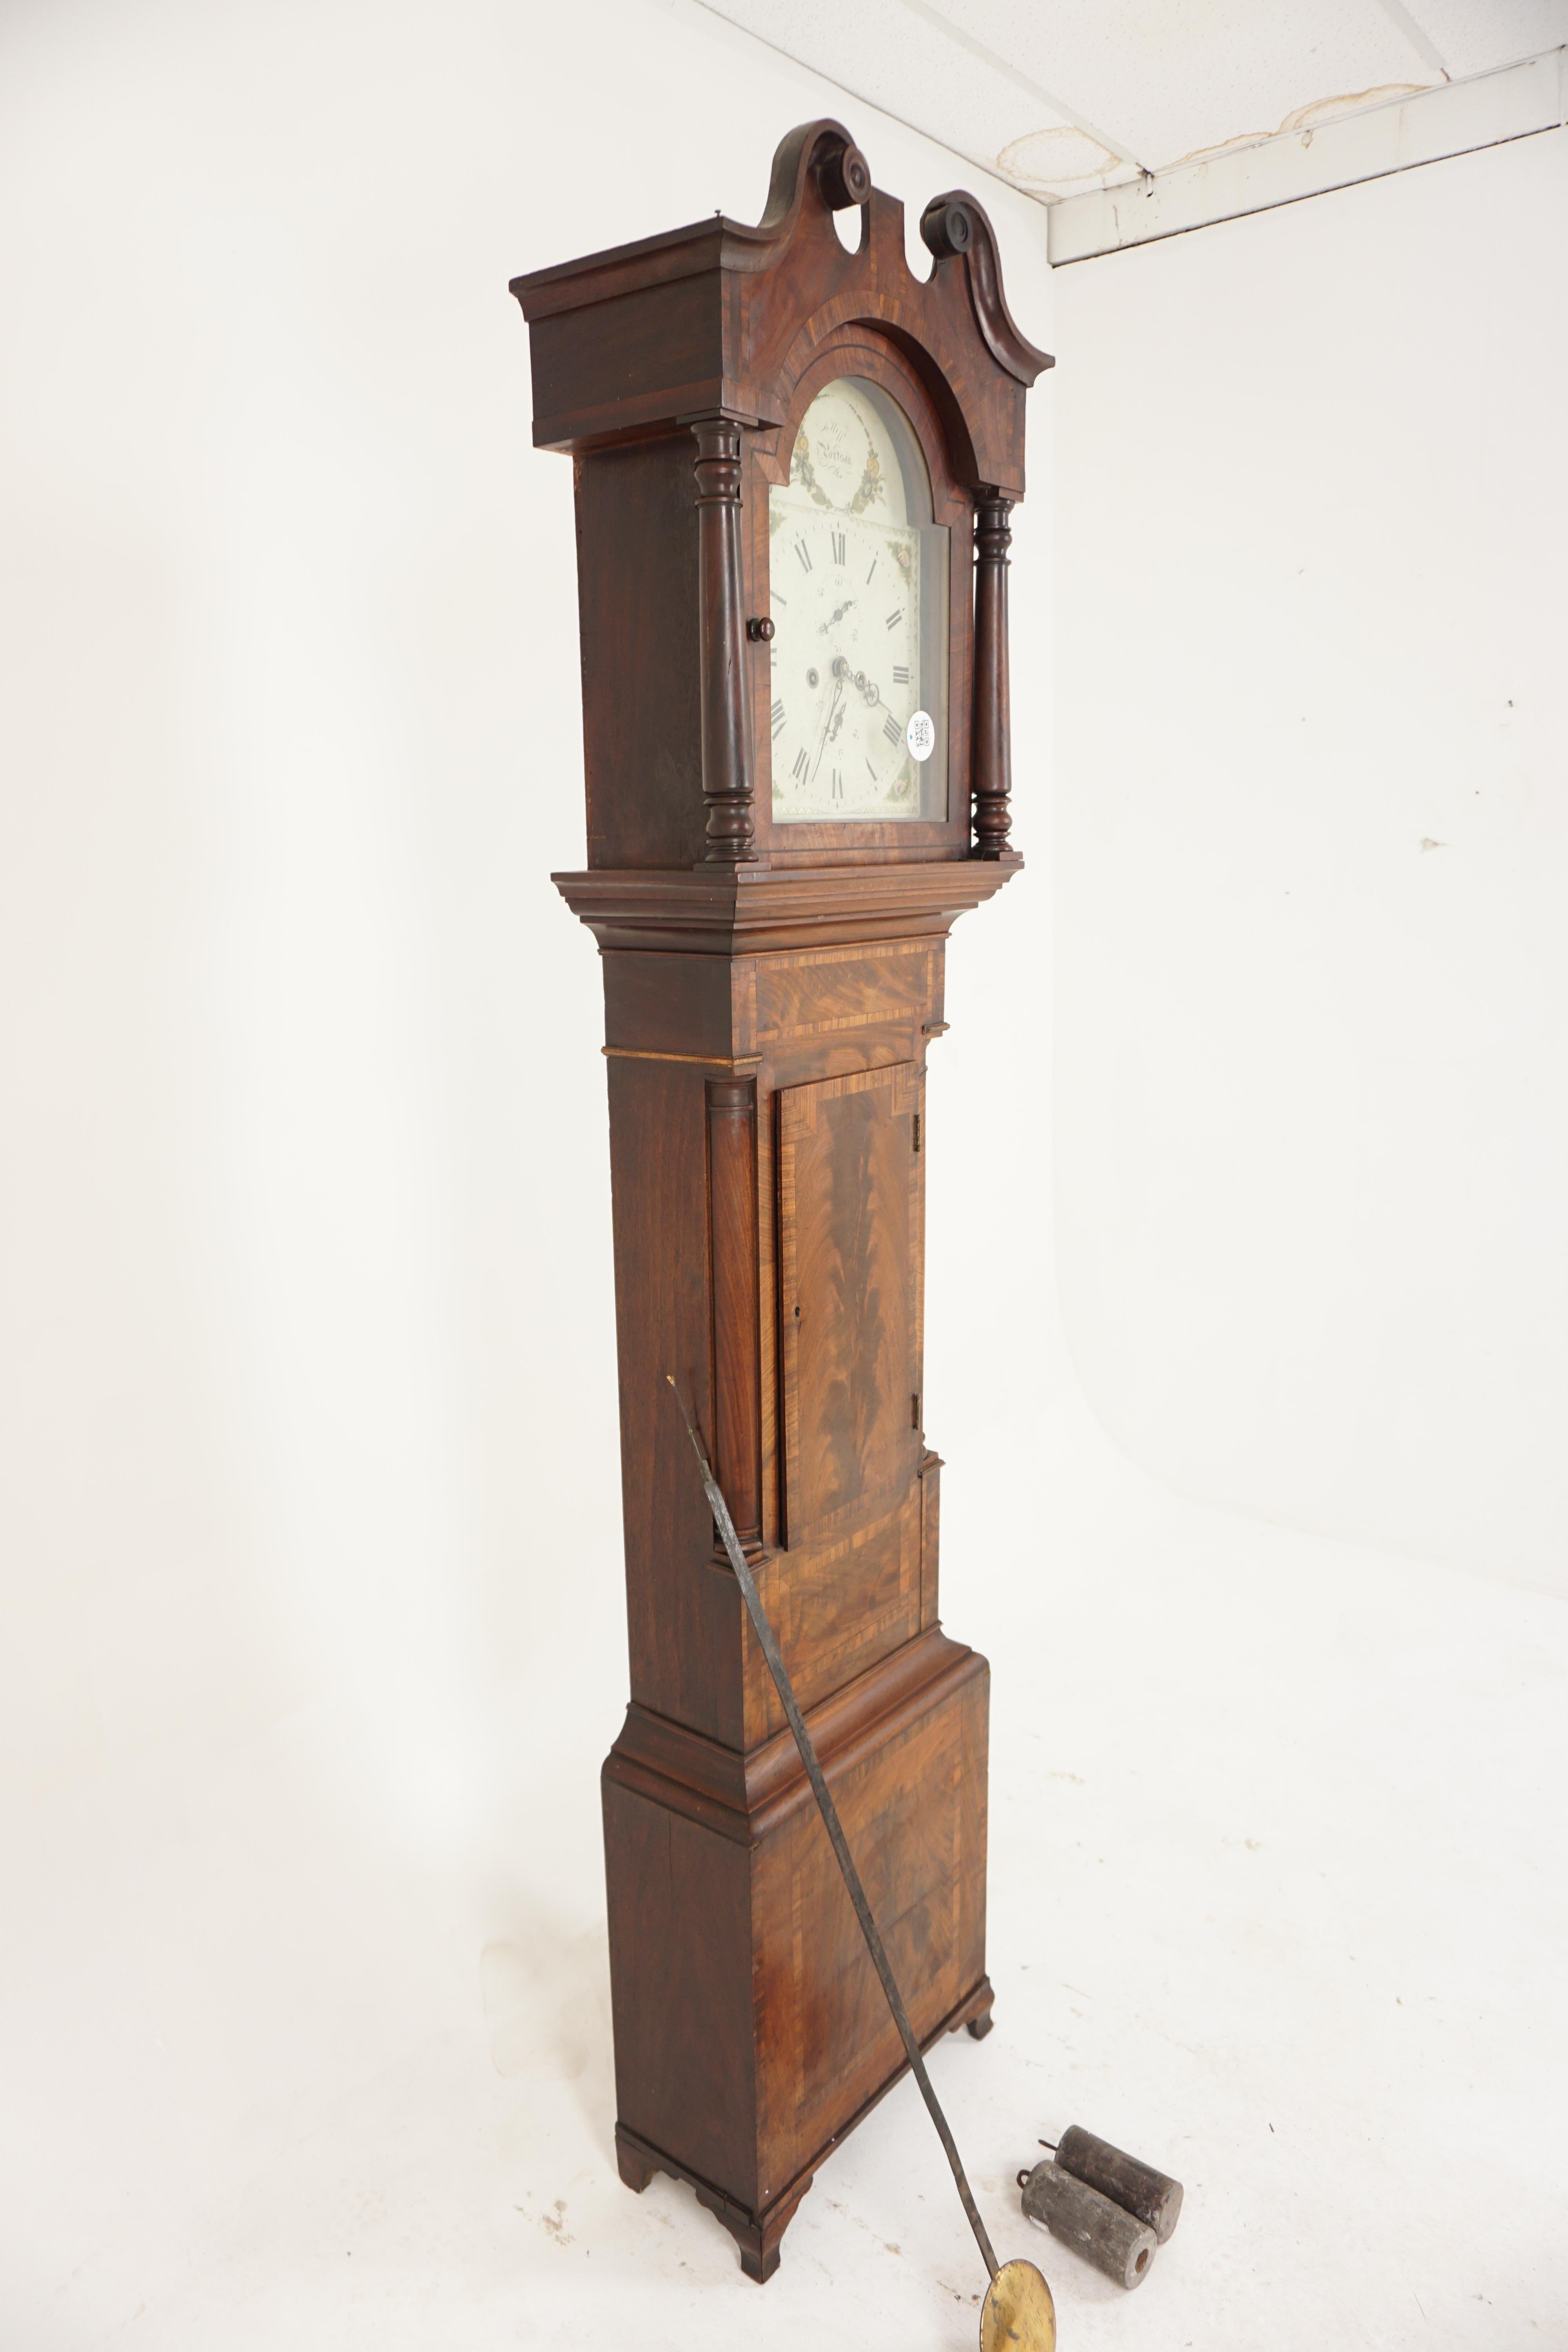 English Victorian Grandfather Long Case Clock by Jolliffe of Portsea, England 1870, H061